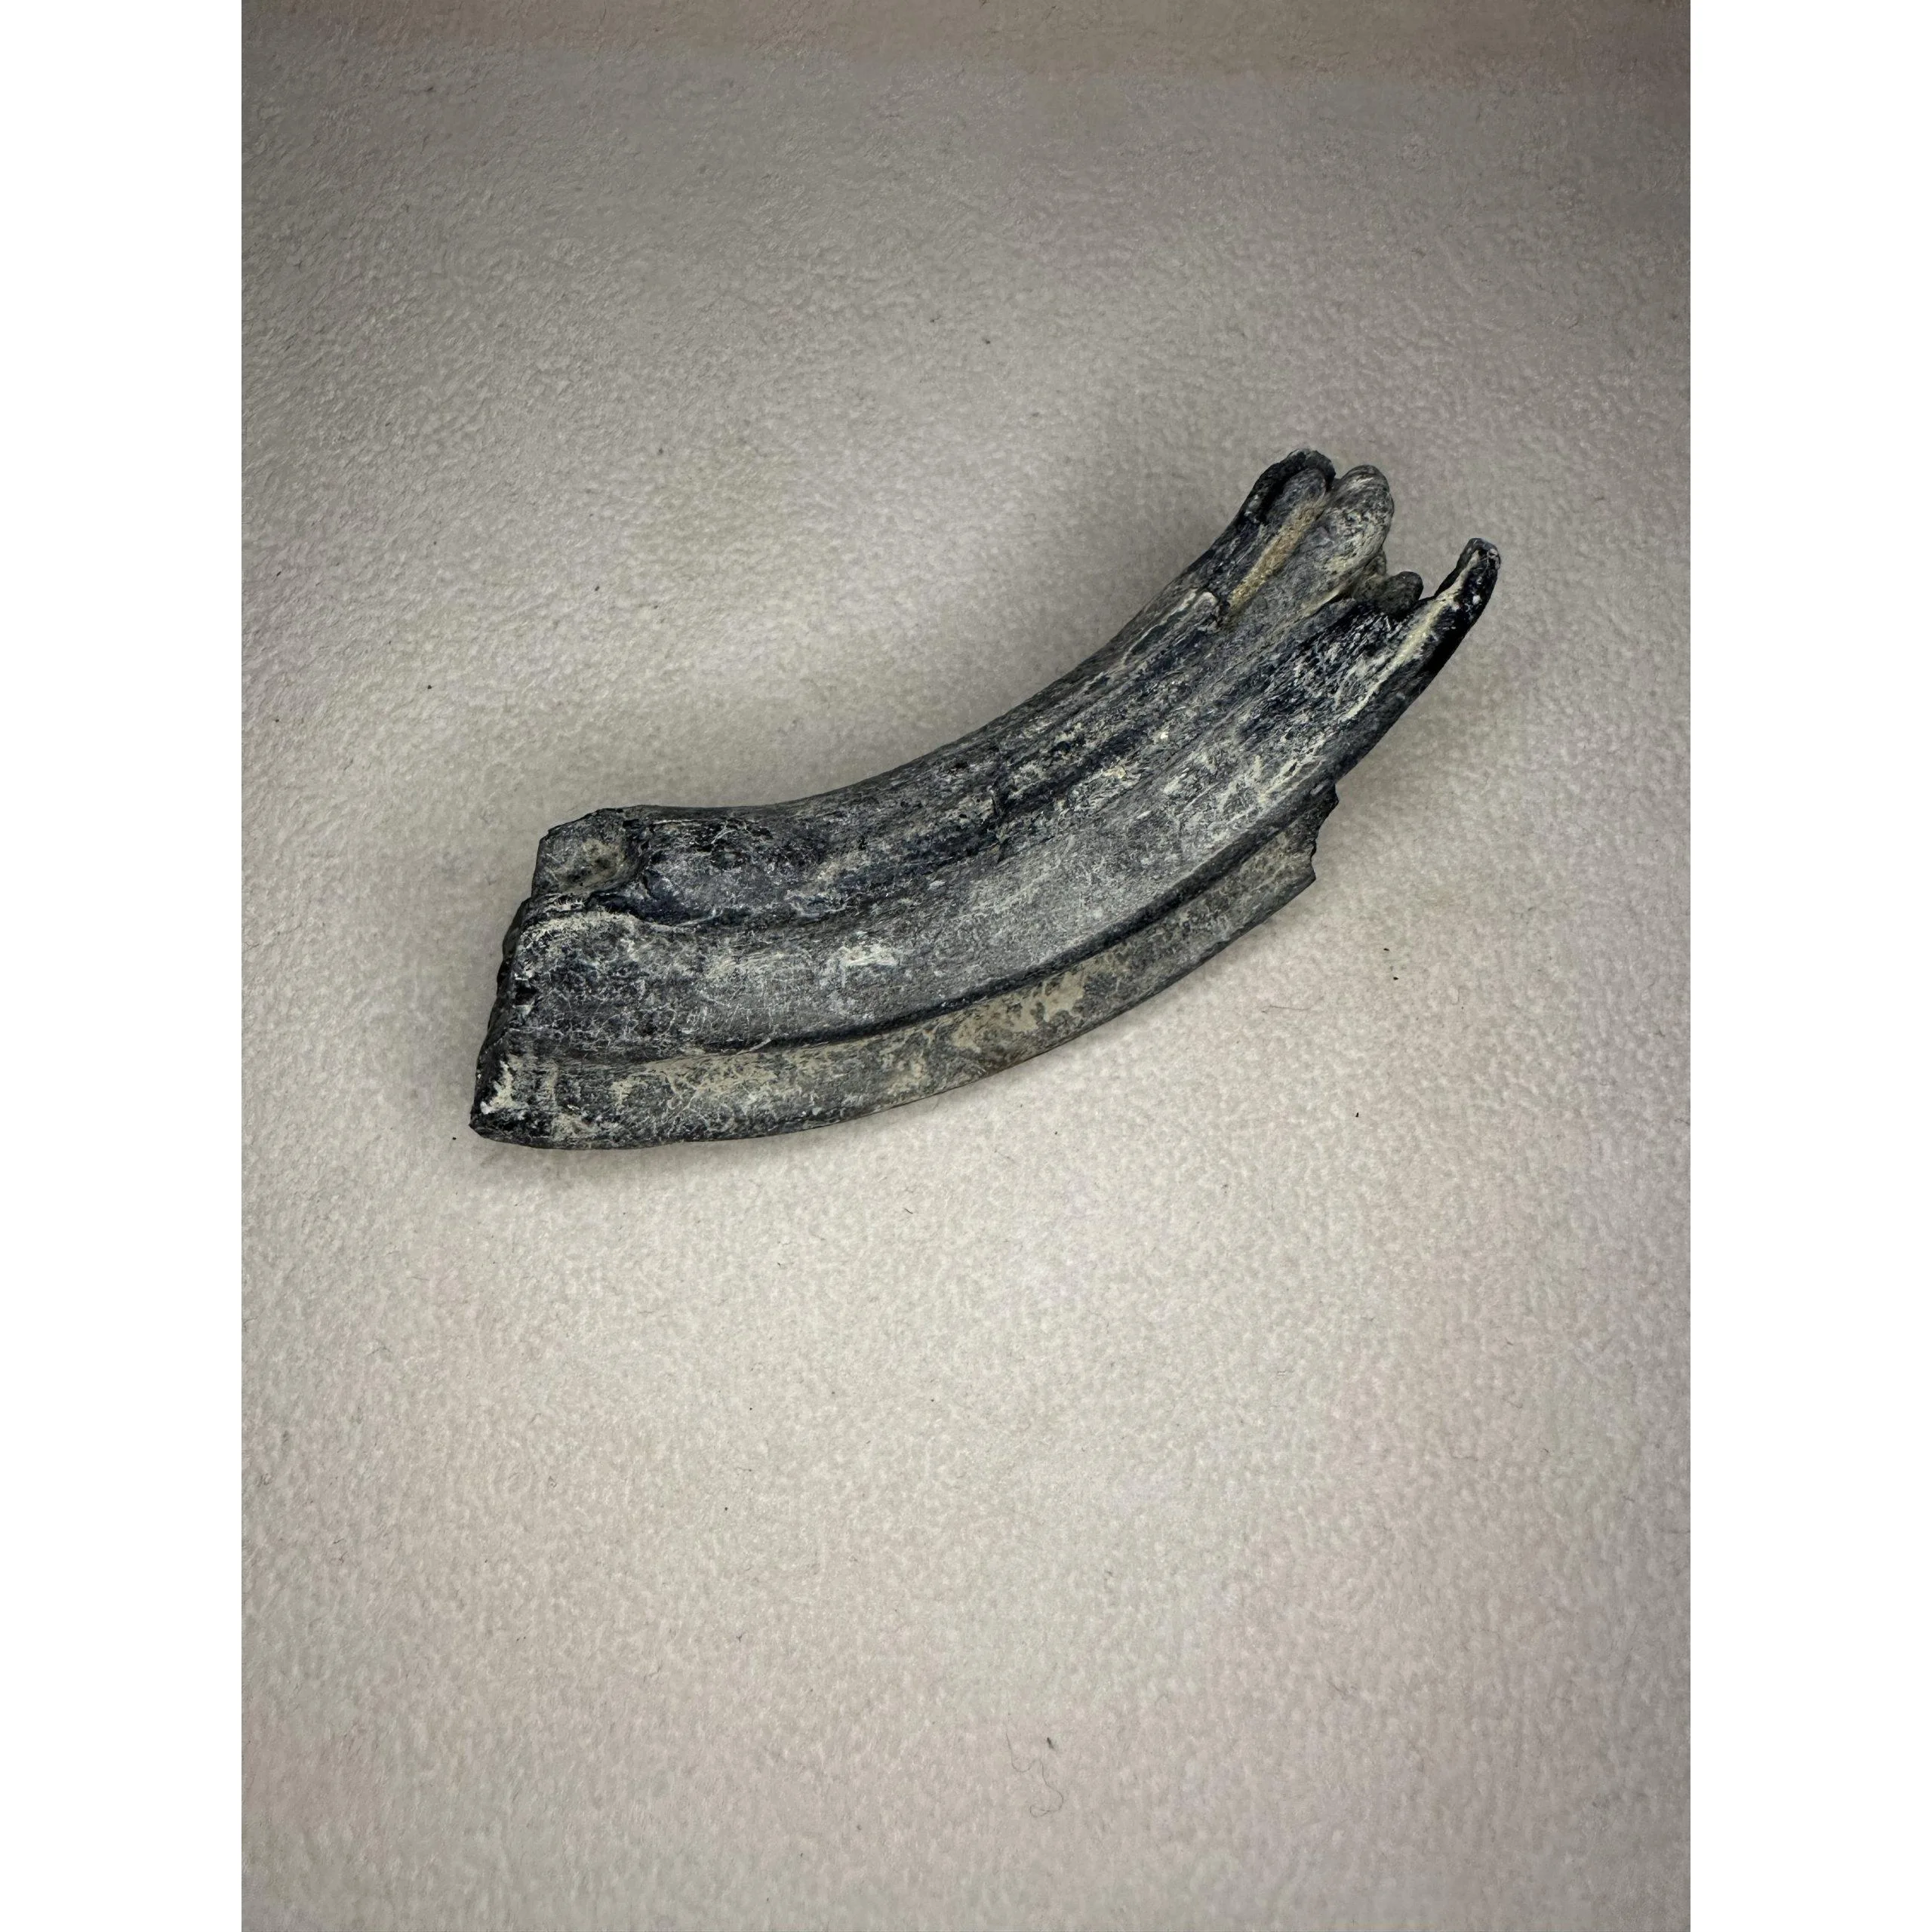 Fossil Horse Tooth – Florida Prehistoric Online